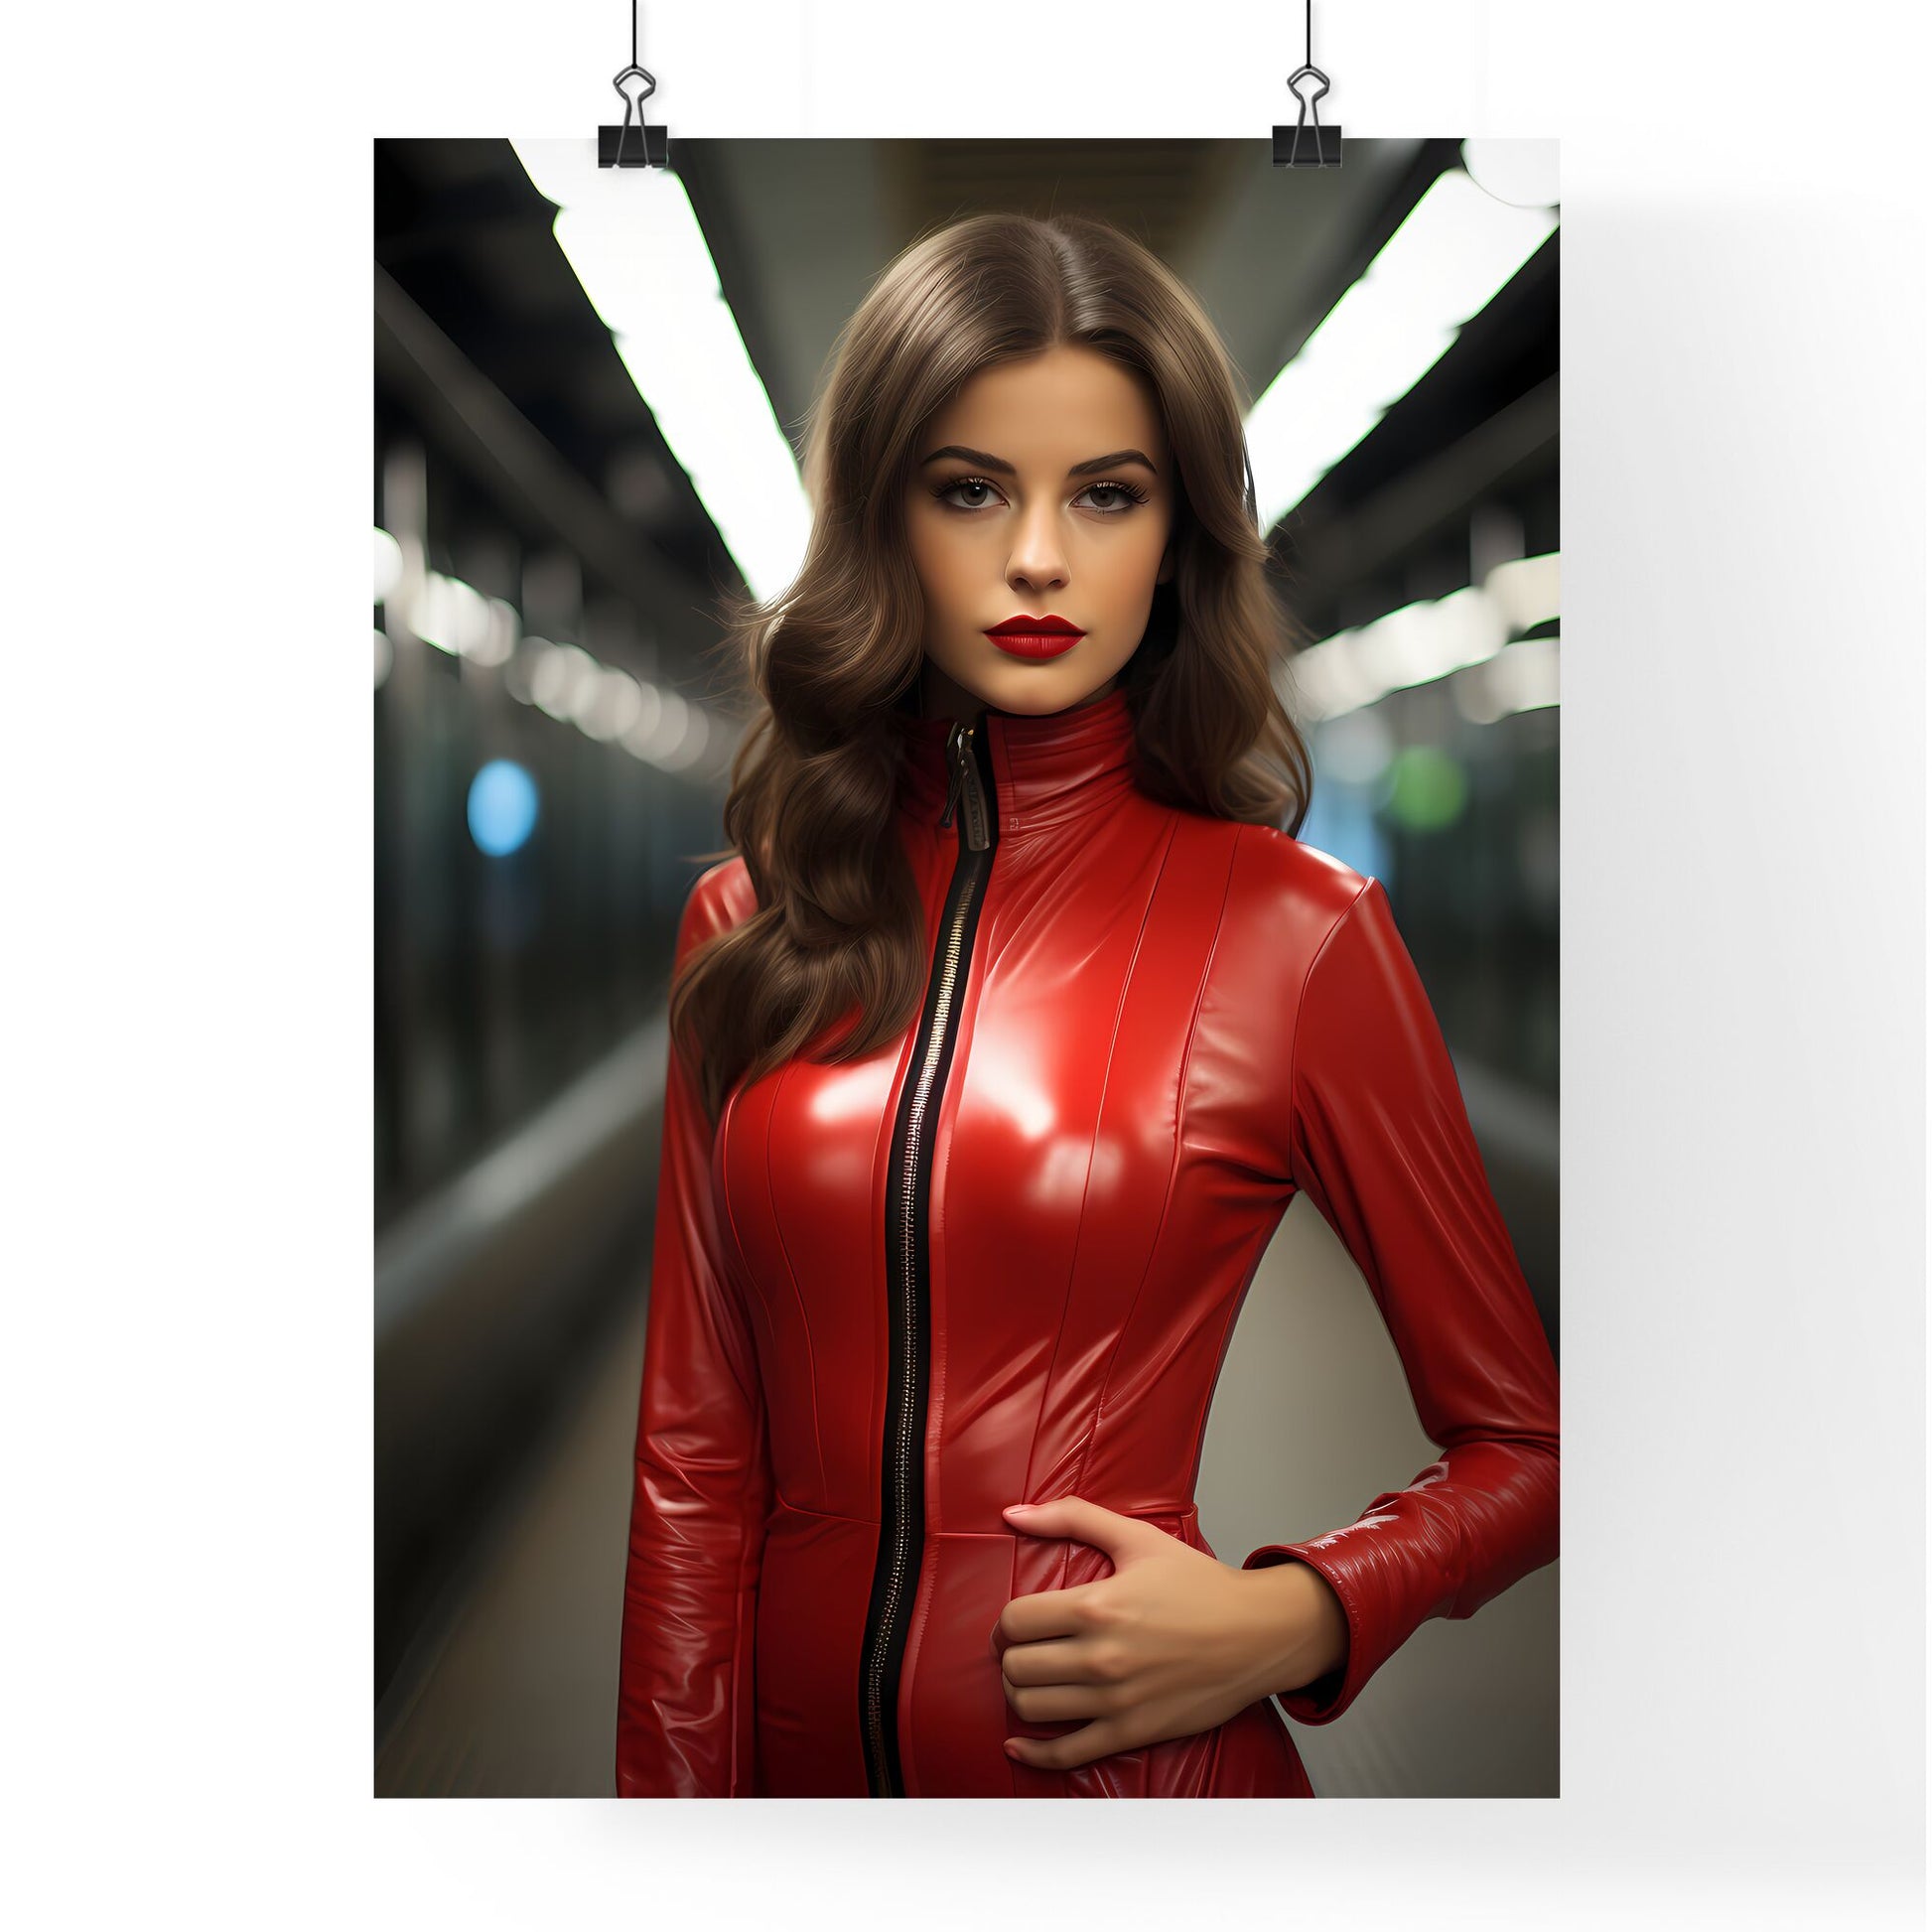 A Poster of standing on a subway - A Woman In A Red Leather Dress Default Title